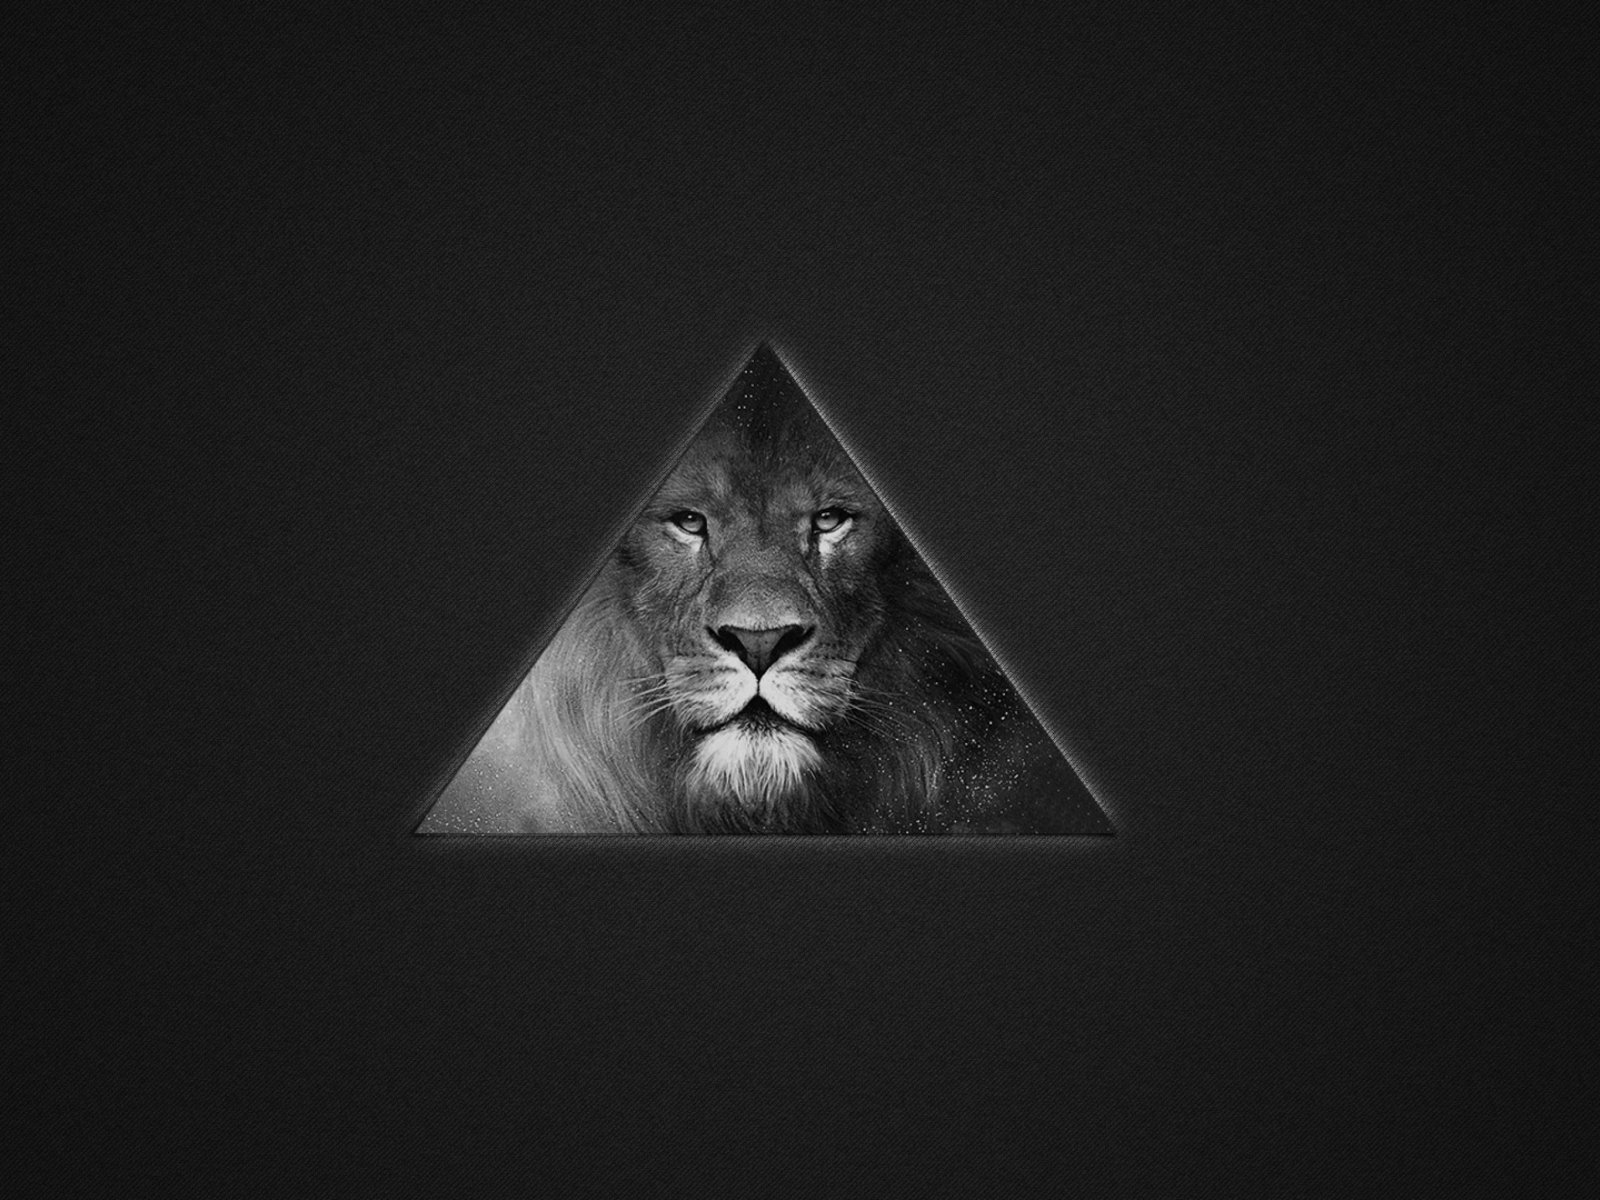 Lion's Black And White Triangle wallpaper 1600x1200